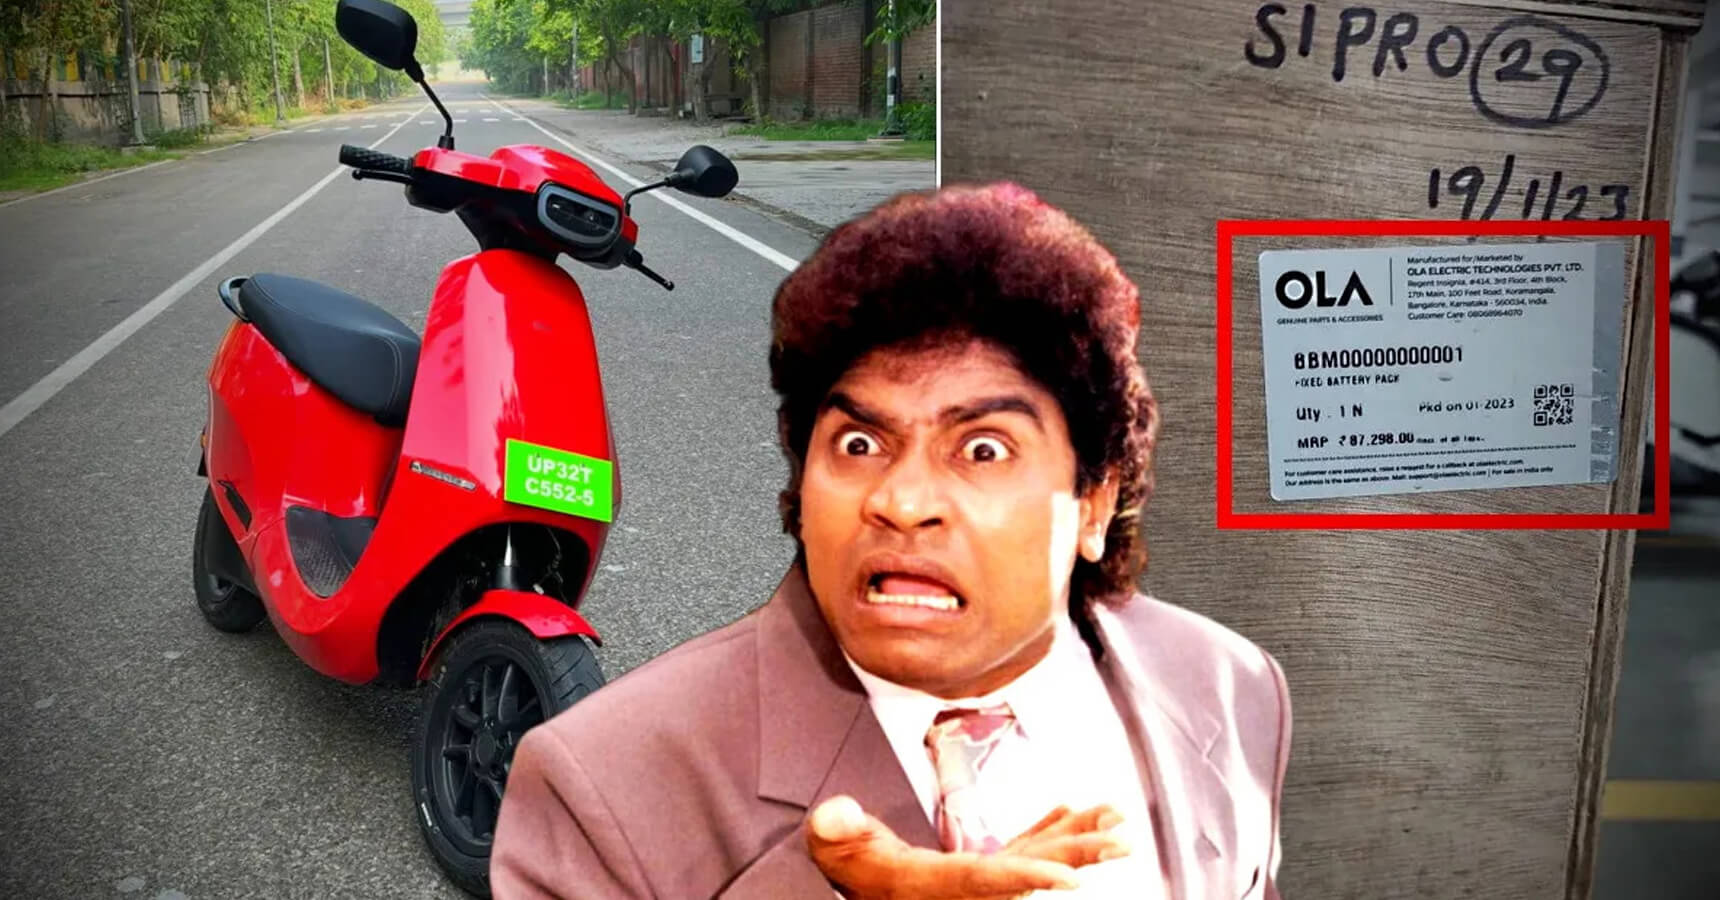 Ola S1 Pro E-Scooter Battery Cost